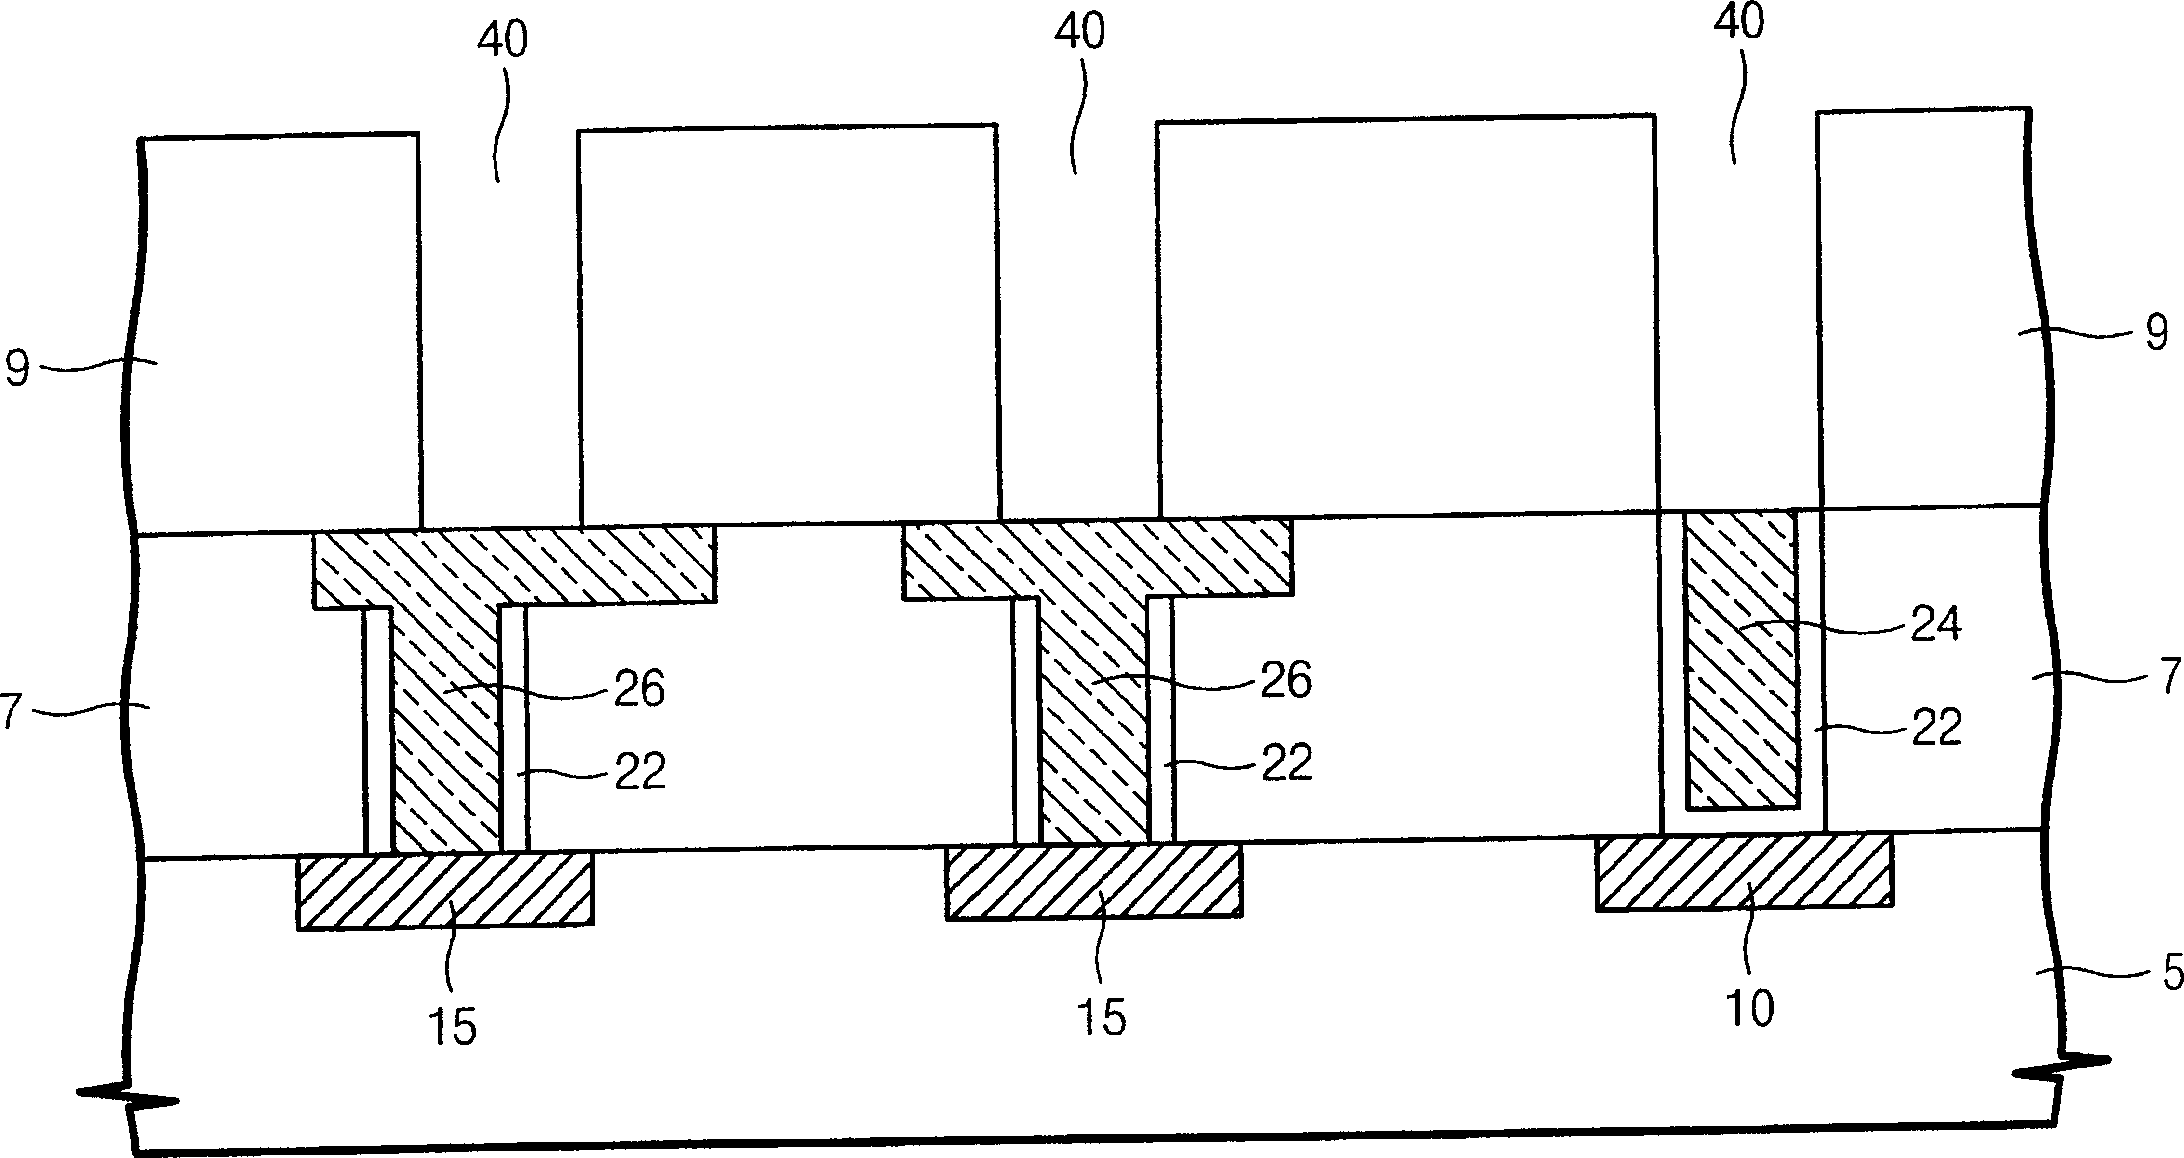 Semiconductor device with analog capacitor